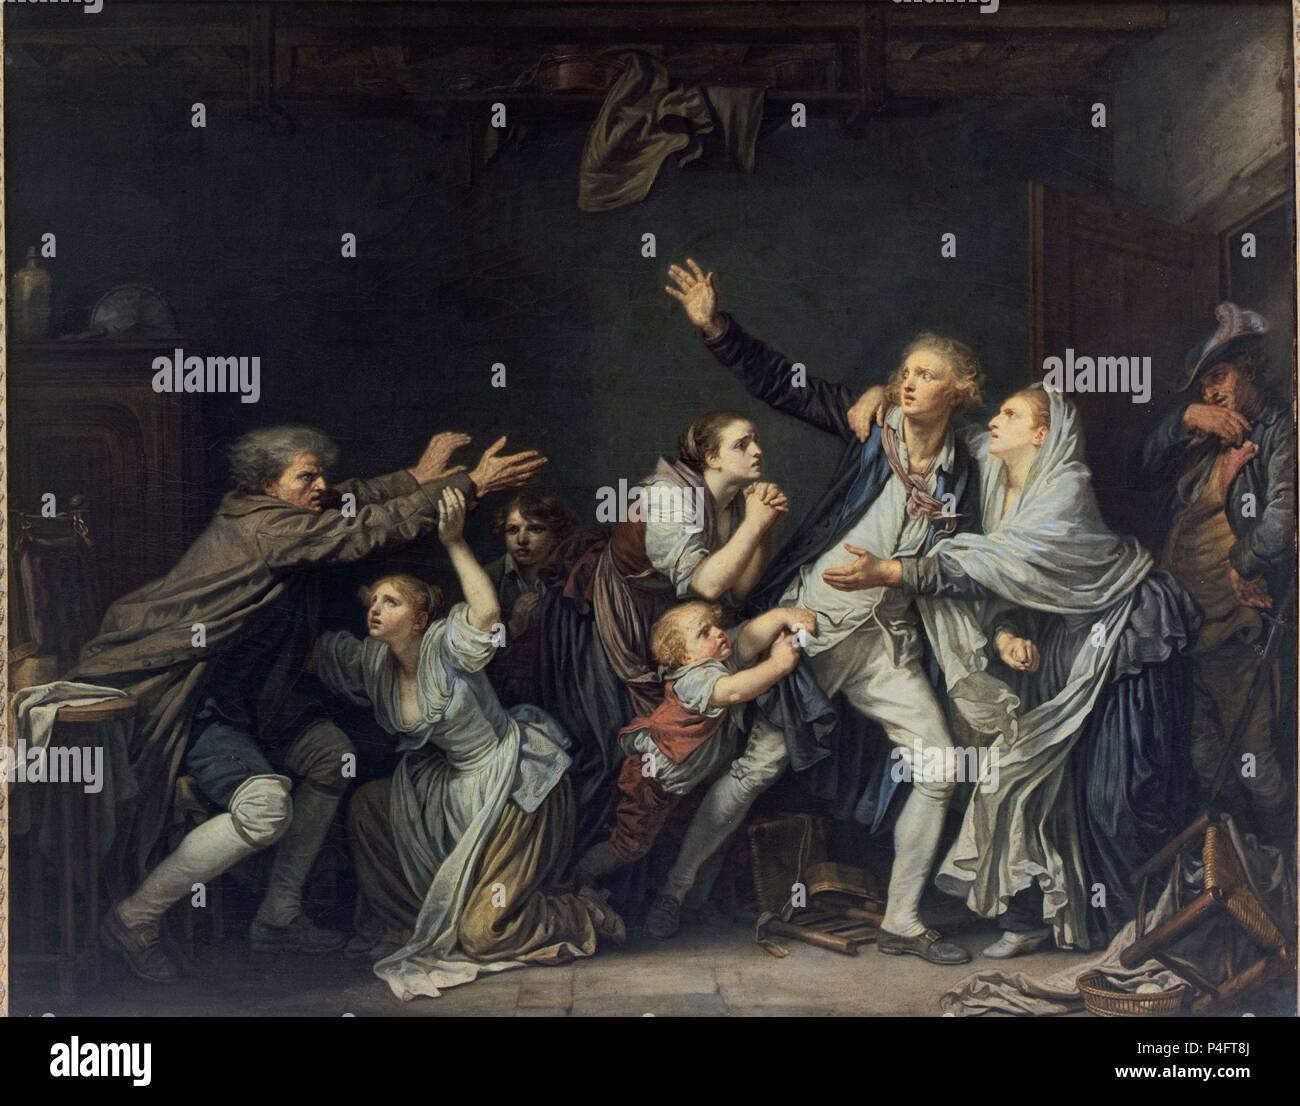 The Father's Curse or The Ungrateful Son - 1777 - 130x162 cm - oil on canvas - French School. Author: Jean Baptiste Greuze (1725-1805). Location: LOUVRE MUSEUM-PAINTINGS. Also known as: LA MALDICION PATERNA. Stock Photo